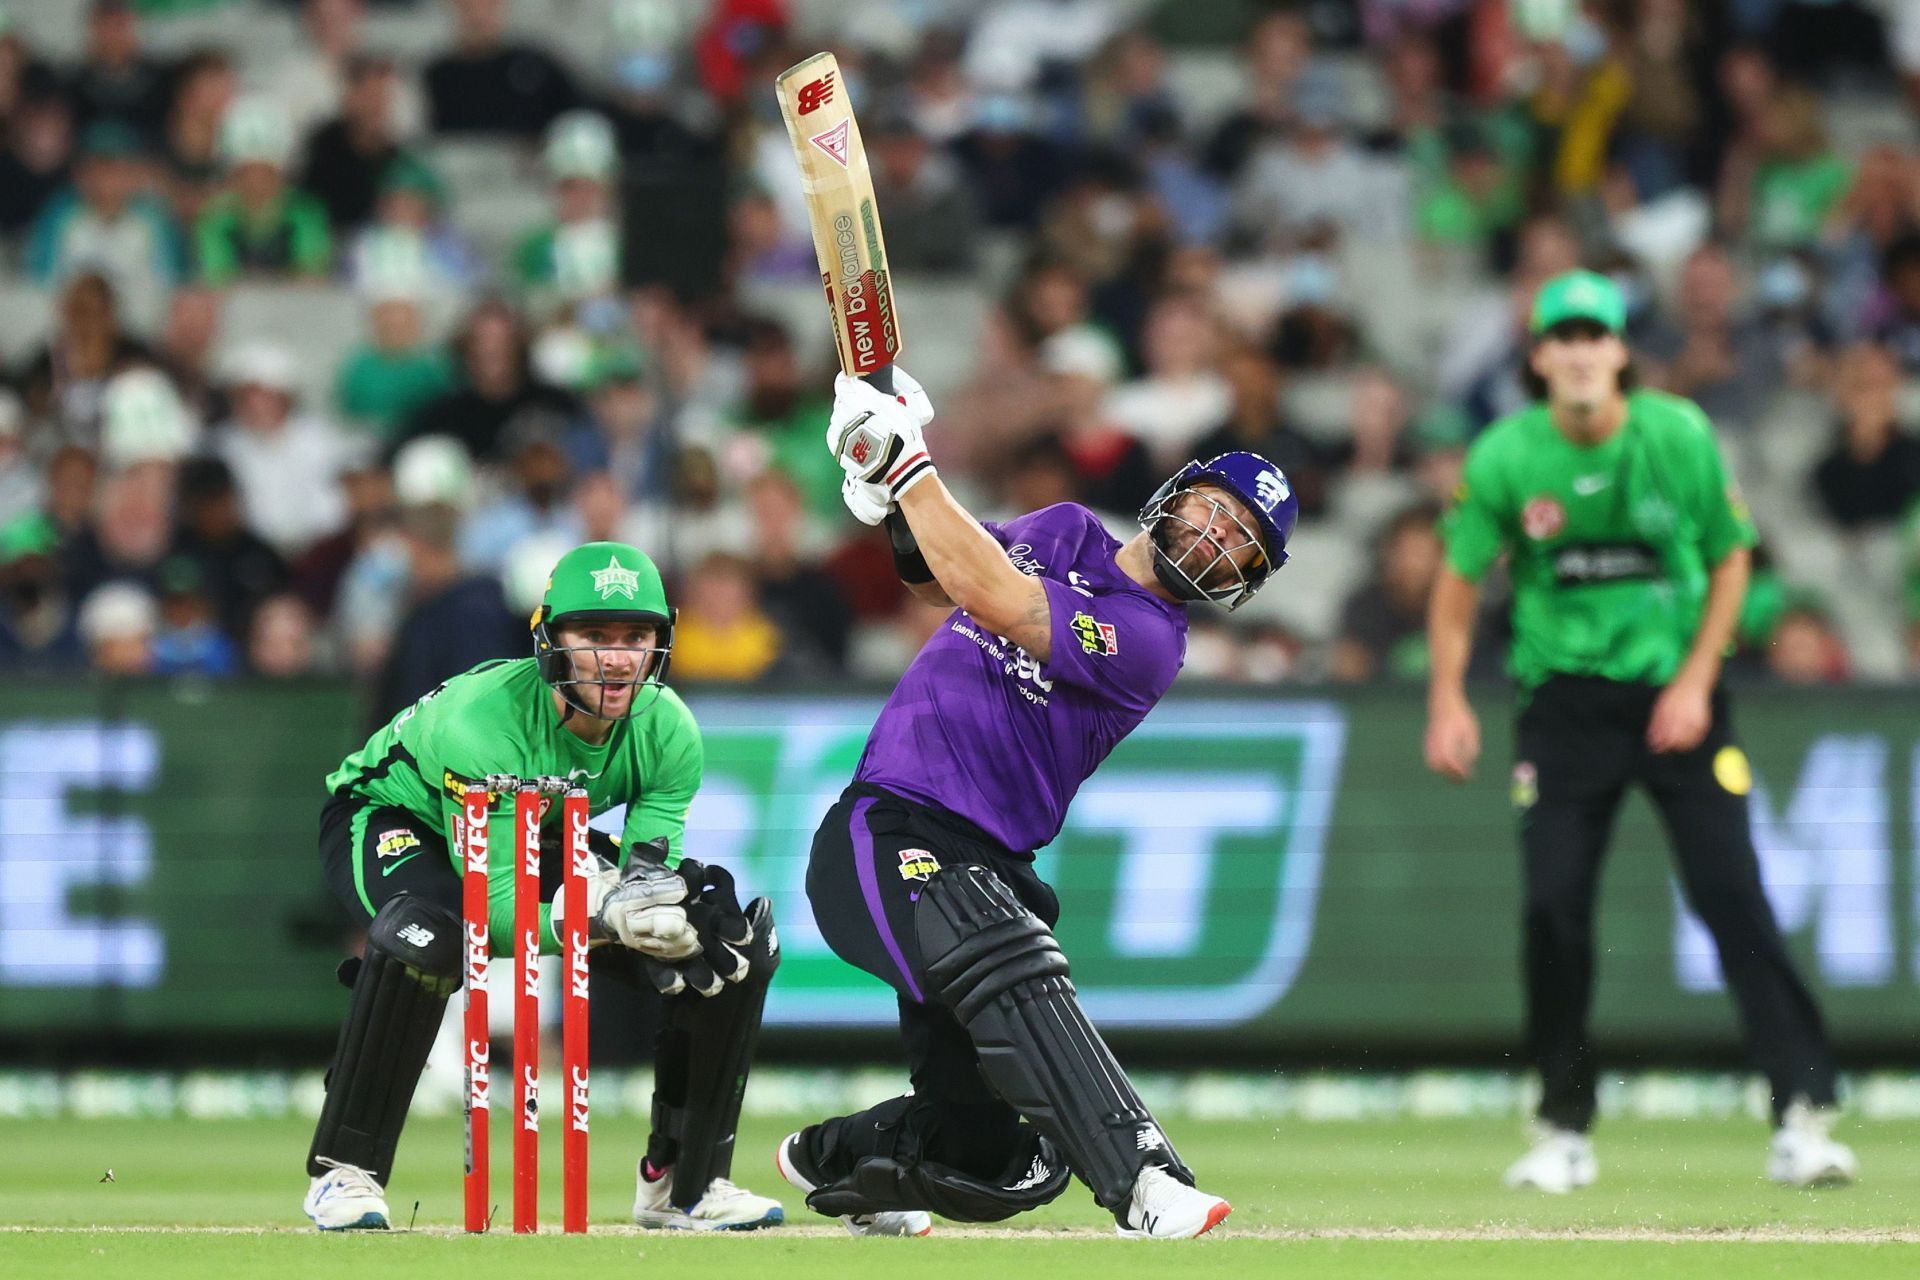 Matthew Wade in the BBL. Pic: Getty Images